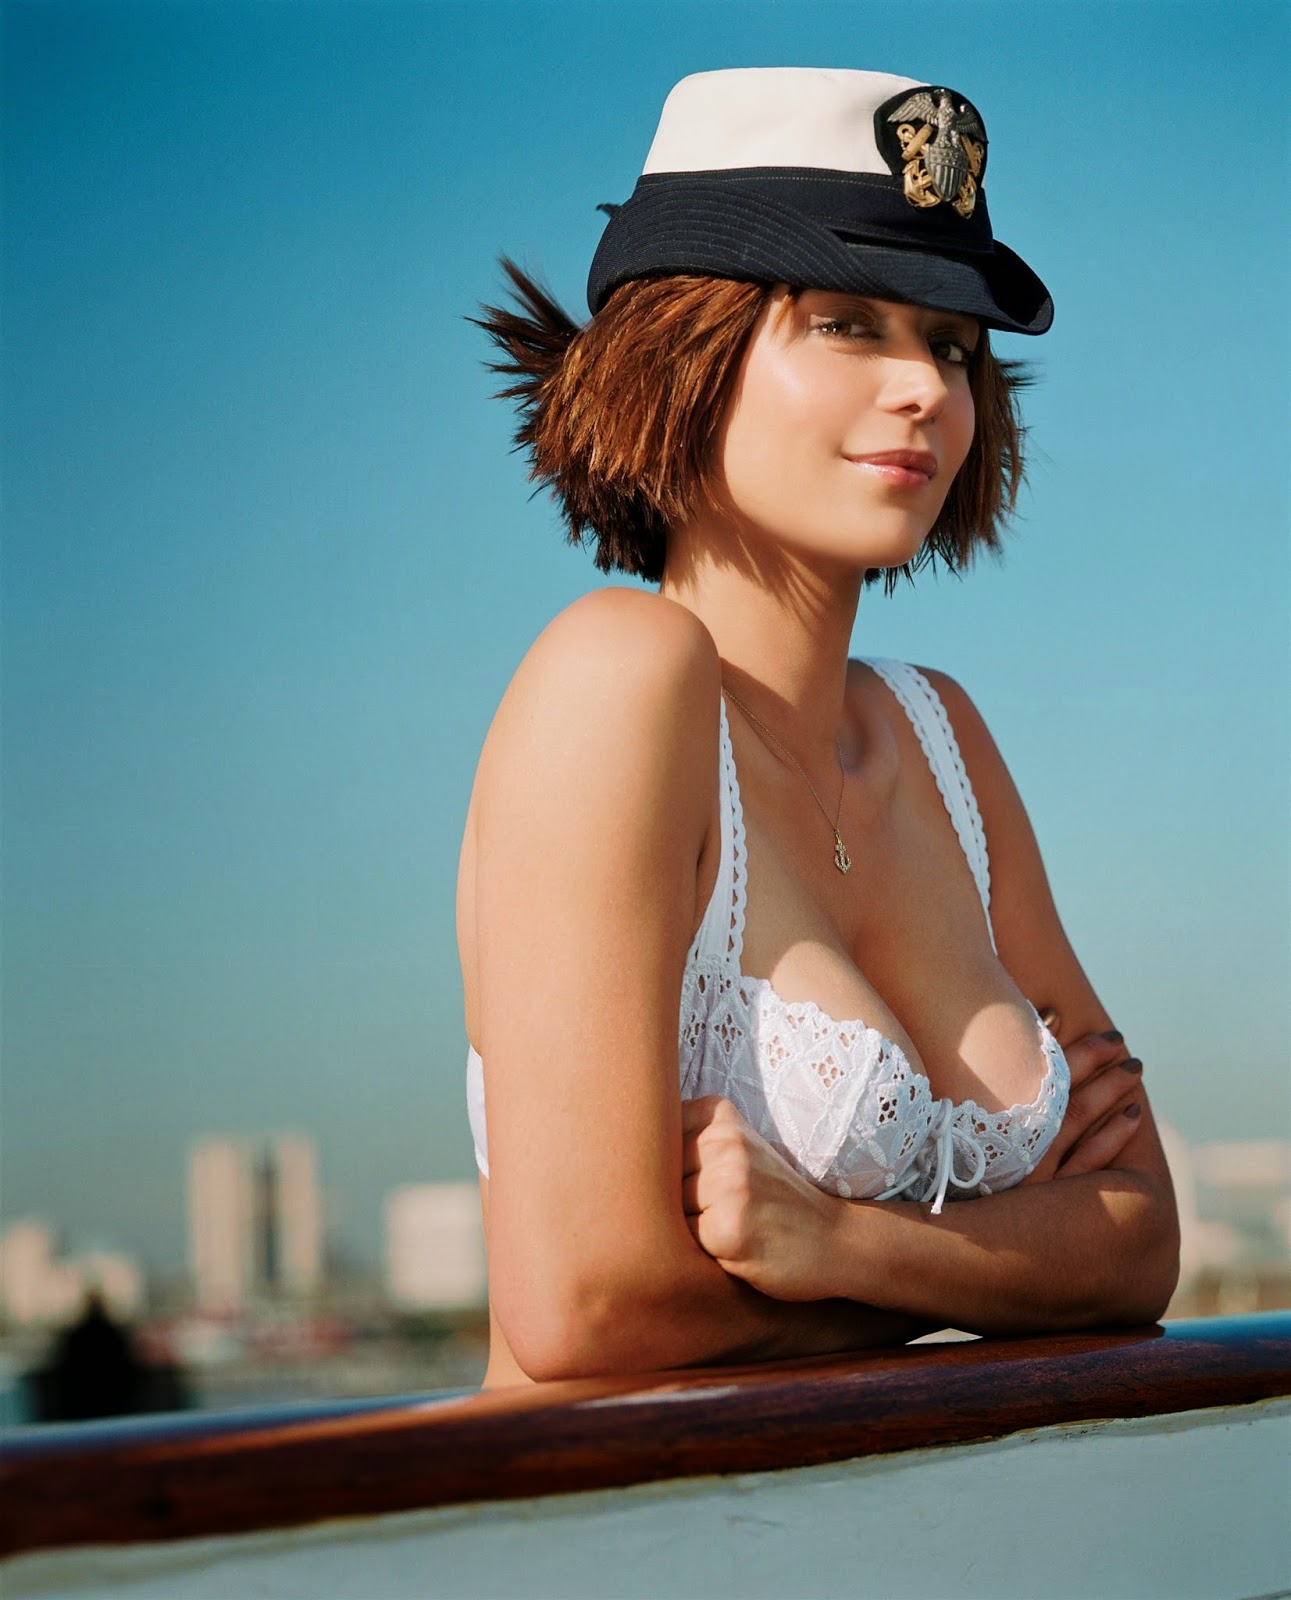 Hot Catherine Bell Photos.